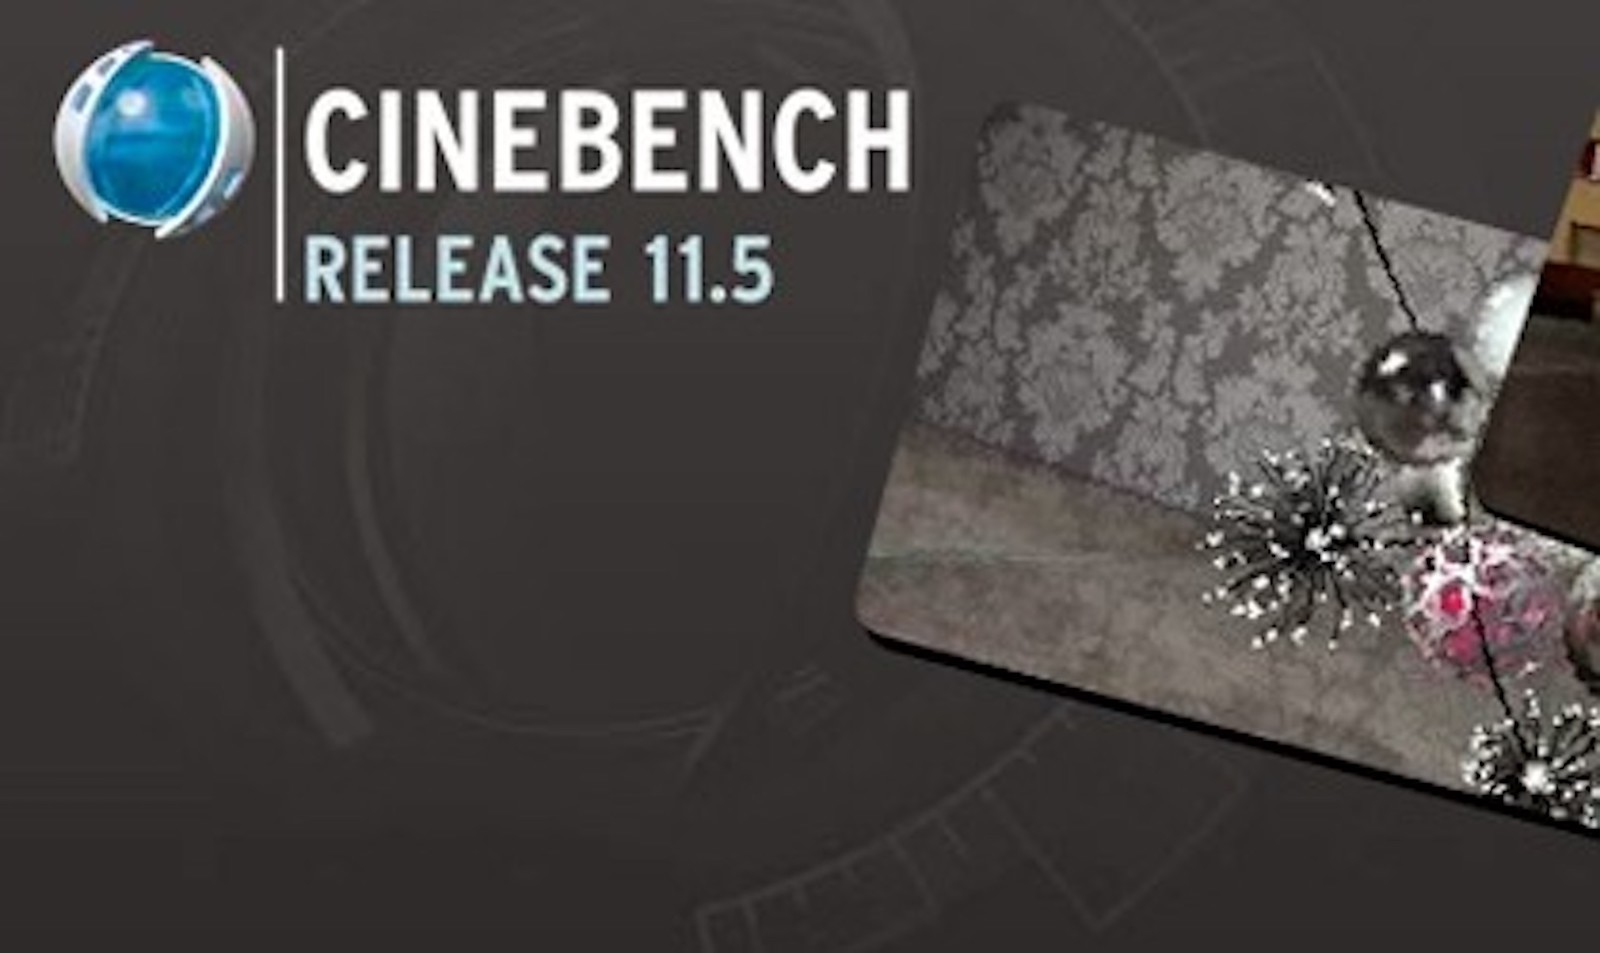 Cinebench 11.5 now available